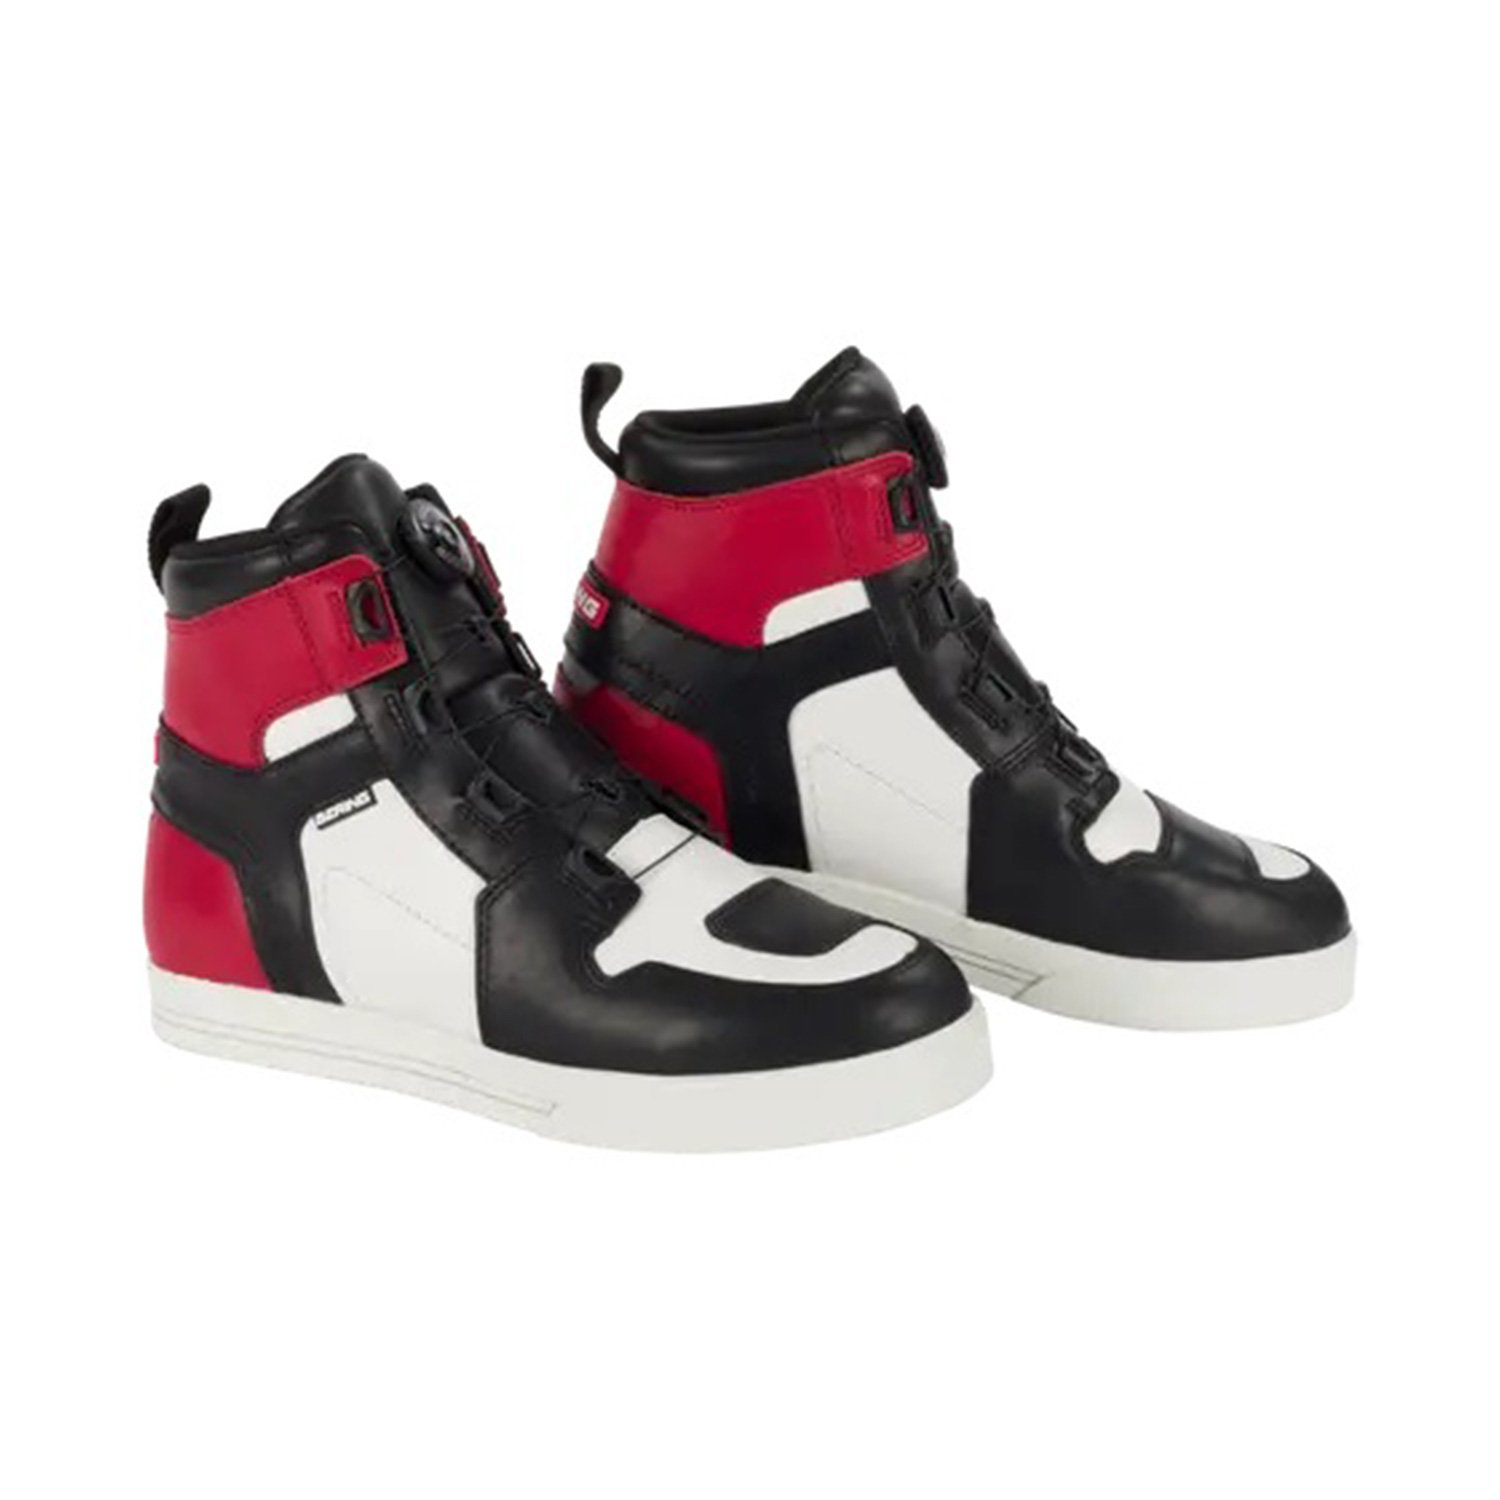 Image of Bering Sneakers Reflex A-Top Black White Red Size 43 EN